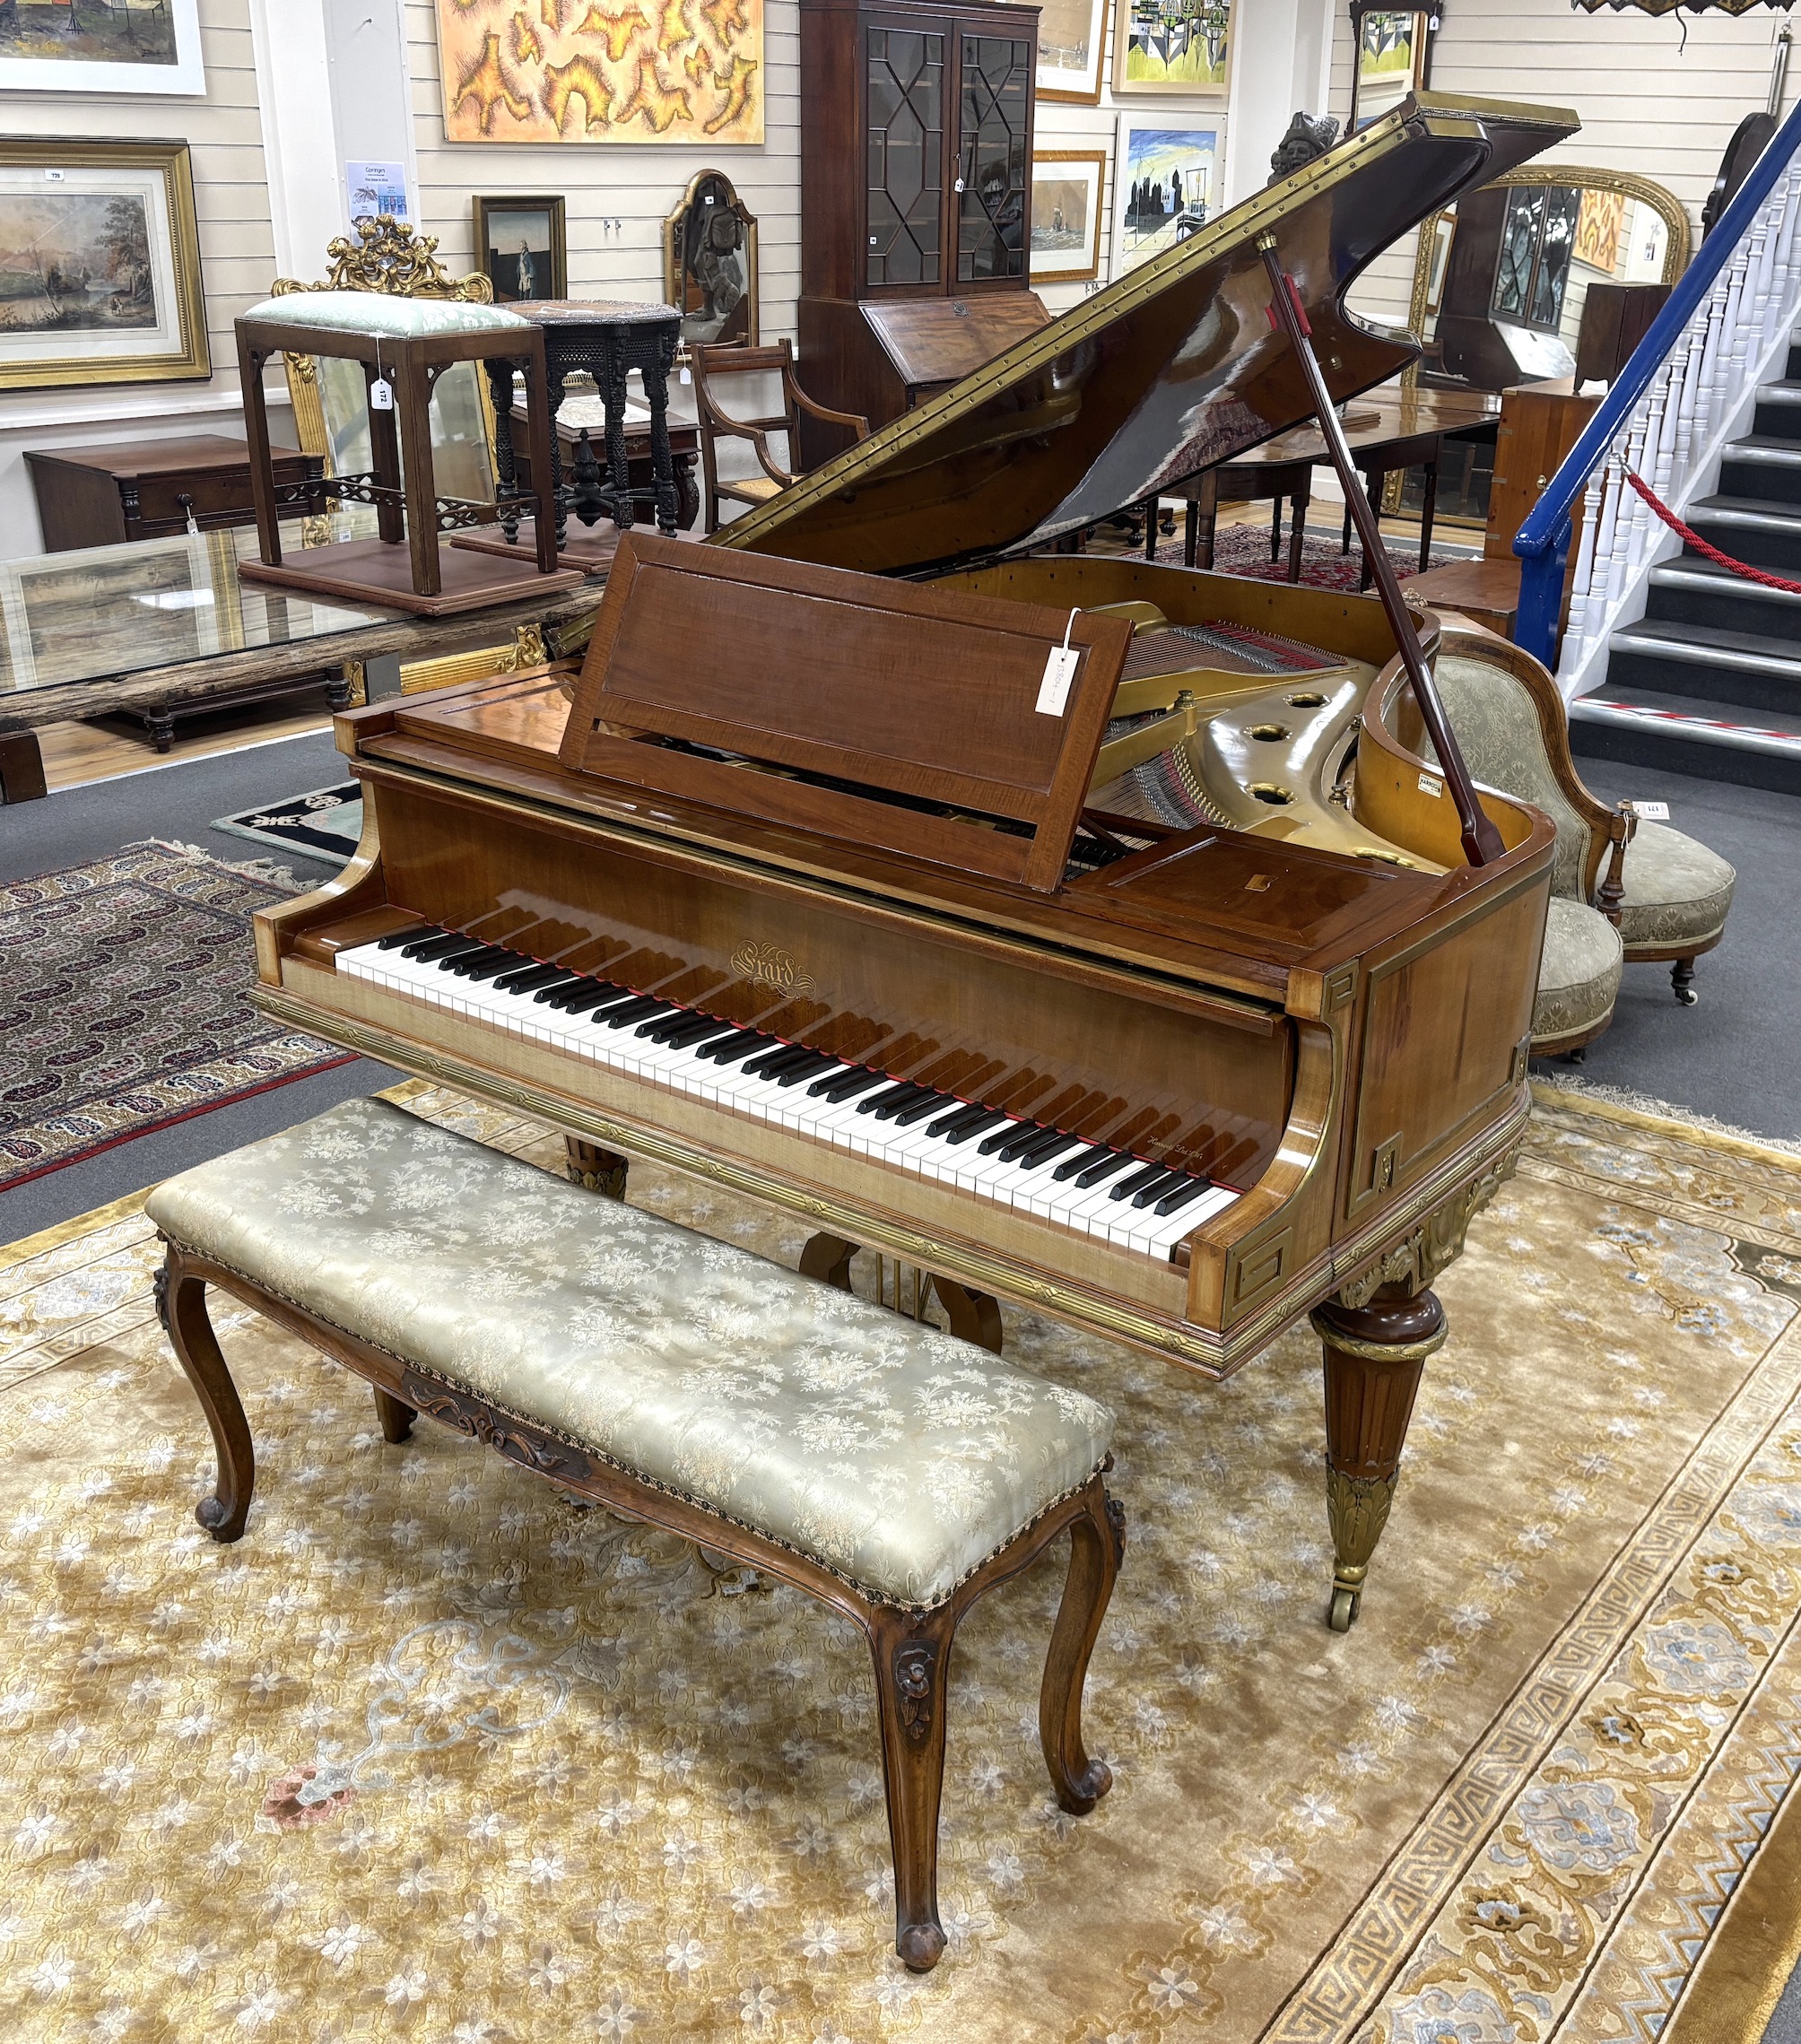 An Erard Louis XVI style mahogany and ormolu mounted boudoir grand piano, c1910 (ivory keys), length 180cm, depth 148cm, height 102cm together with a late Victorian mahogany duet piano stool, CITES Submission reference 5